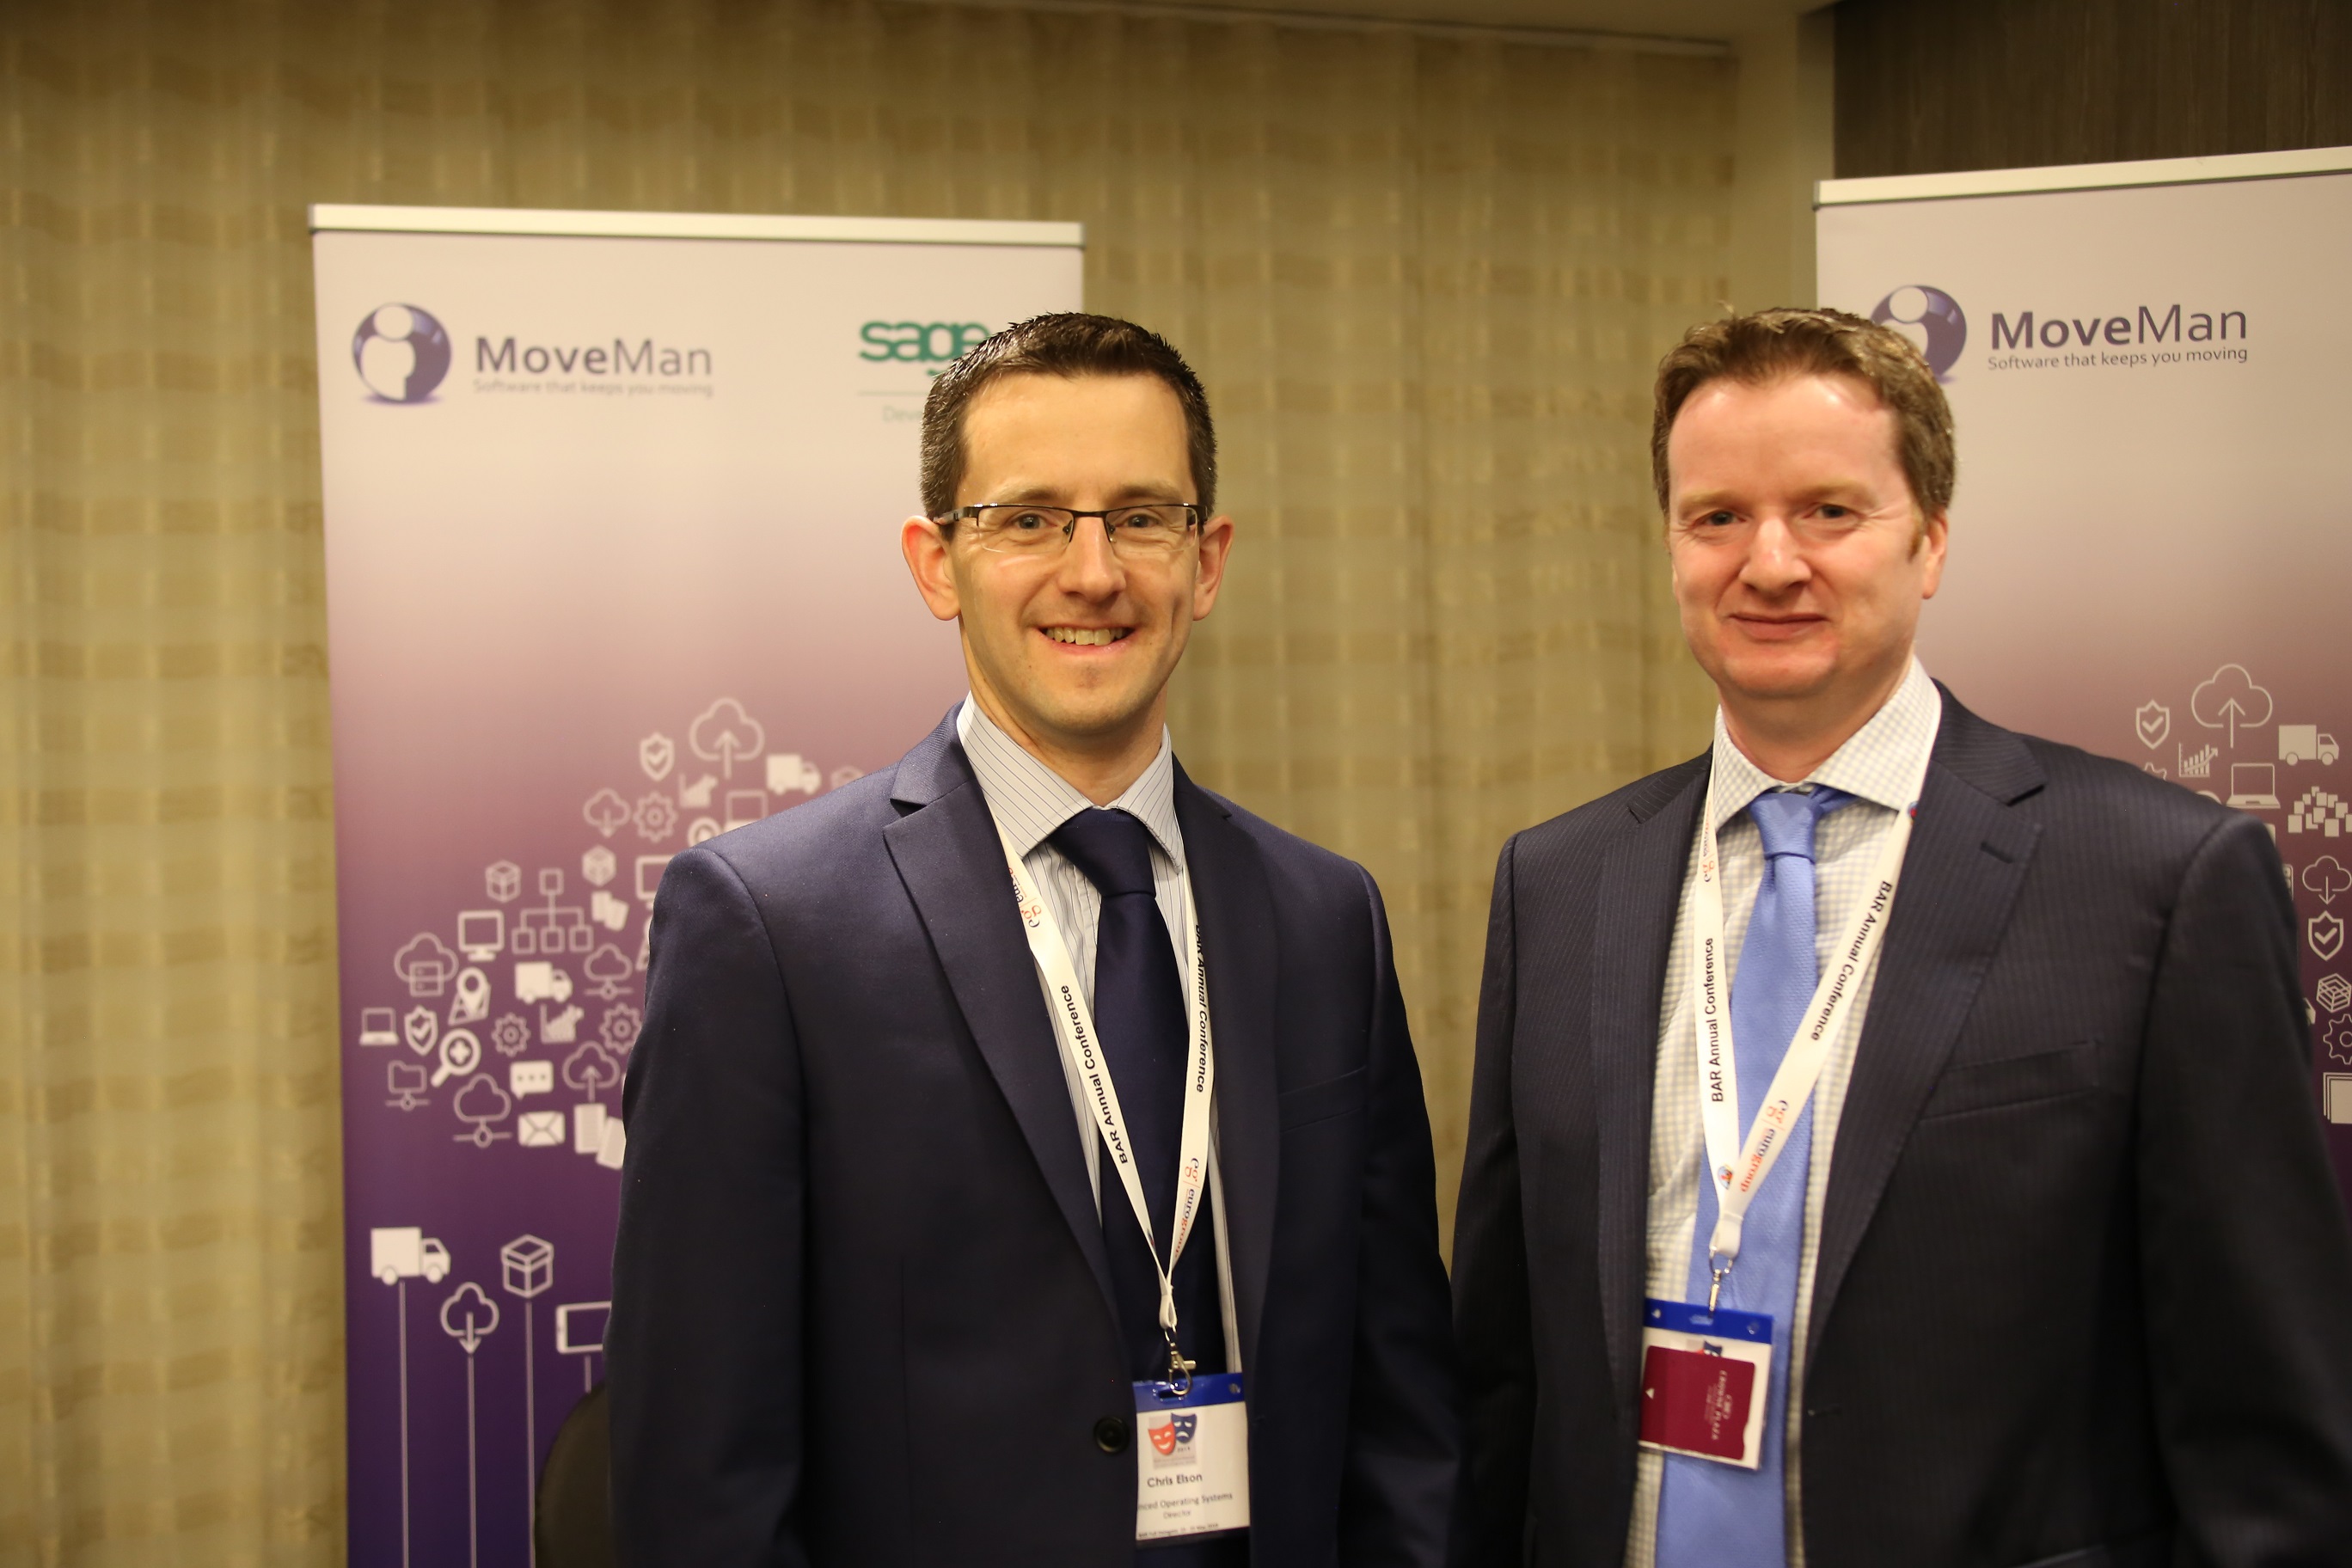 Chris Elson (left) and Simon Maystre from Moveman